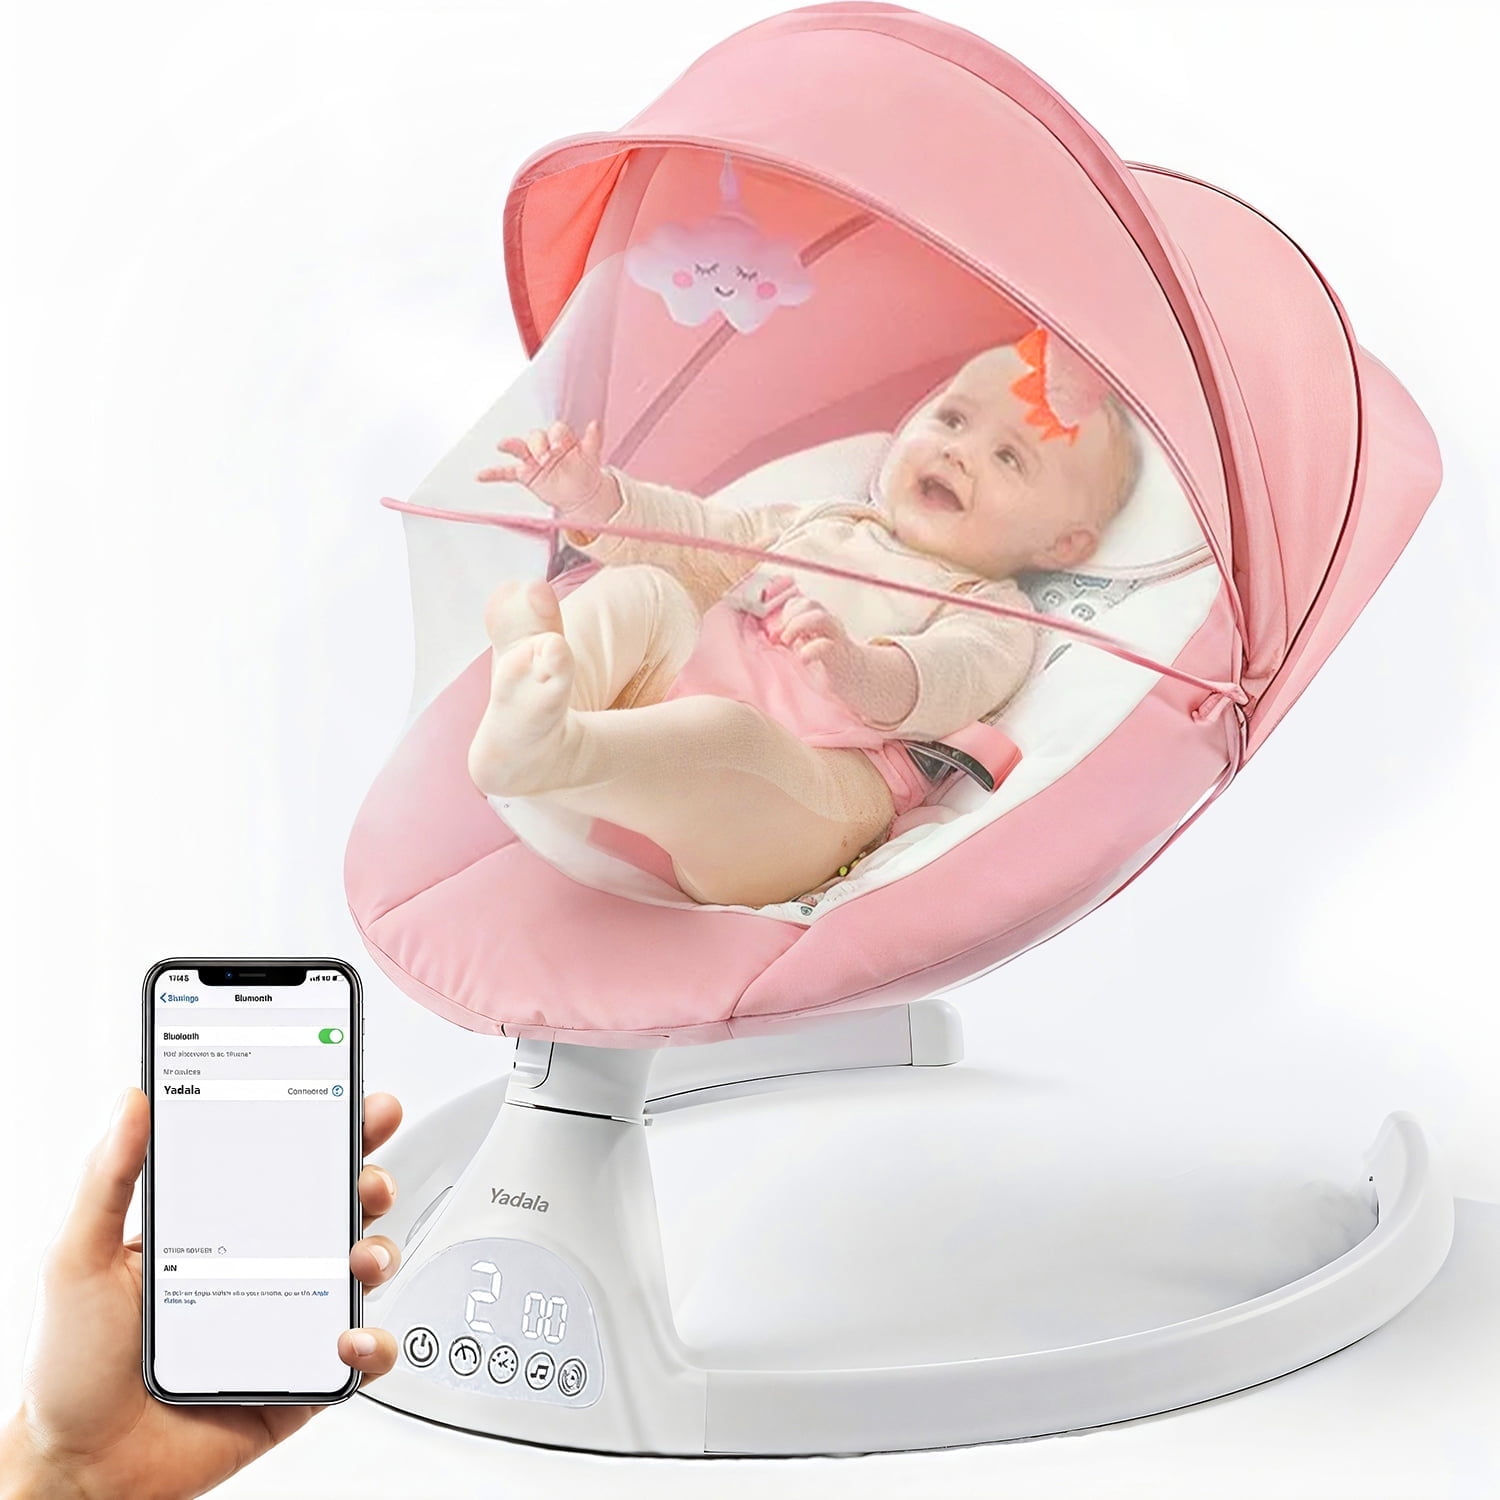 Yadala Baby Swing, Electric Baby Swings for Infants Baby Bouncer with Remote Control and Music, Pink - image 1 of 8